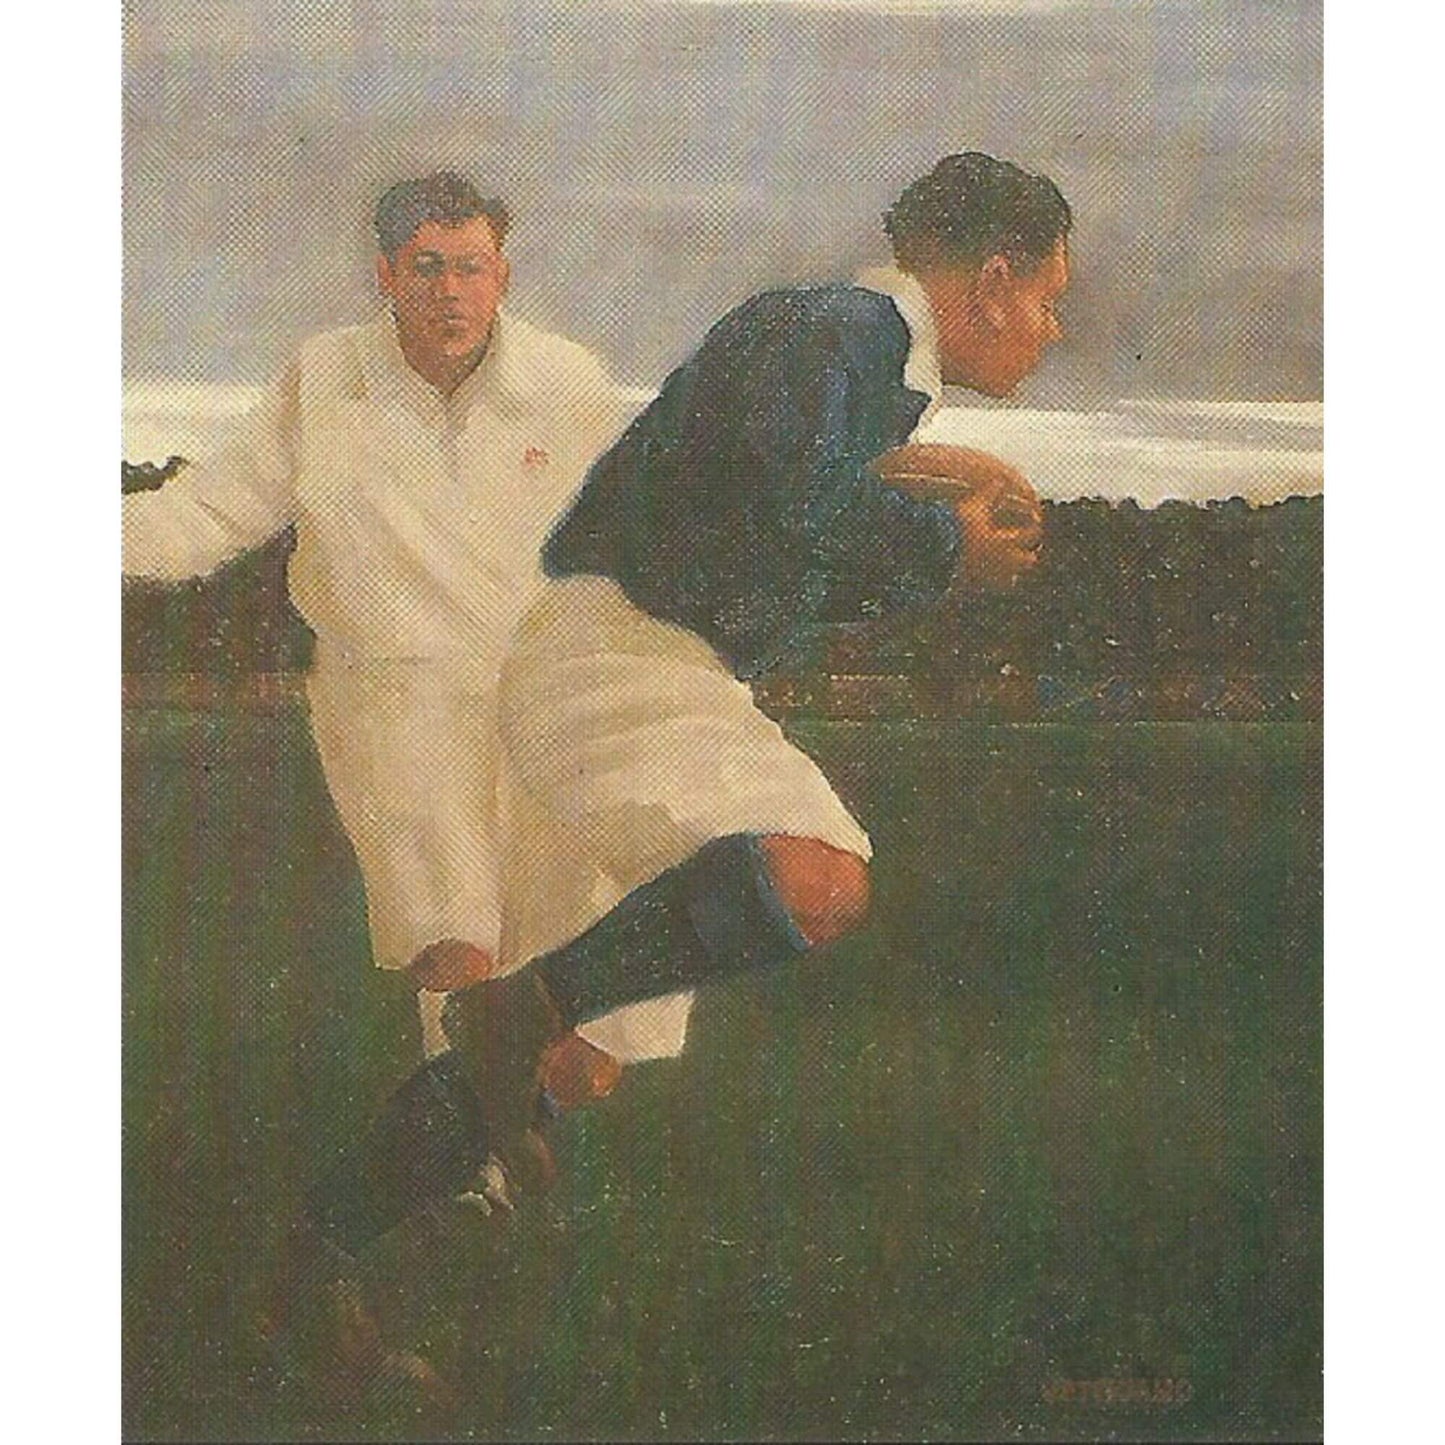 Eluding The Tackle by Jack Vettriano